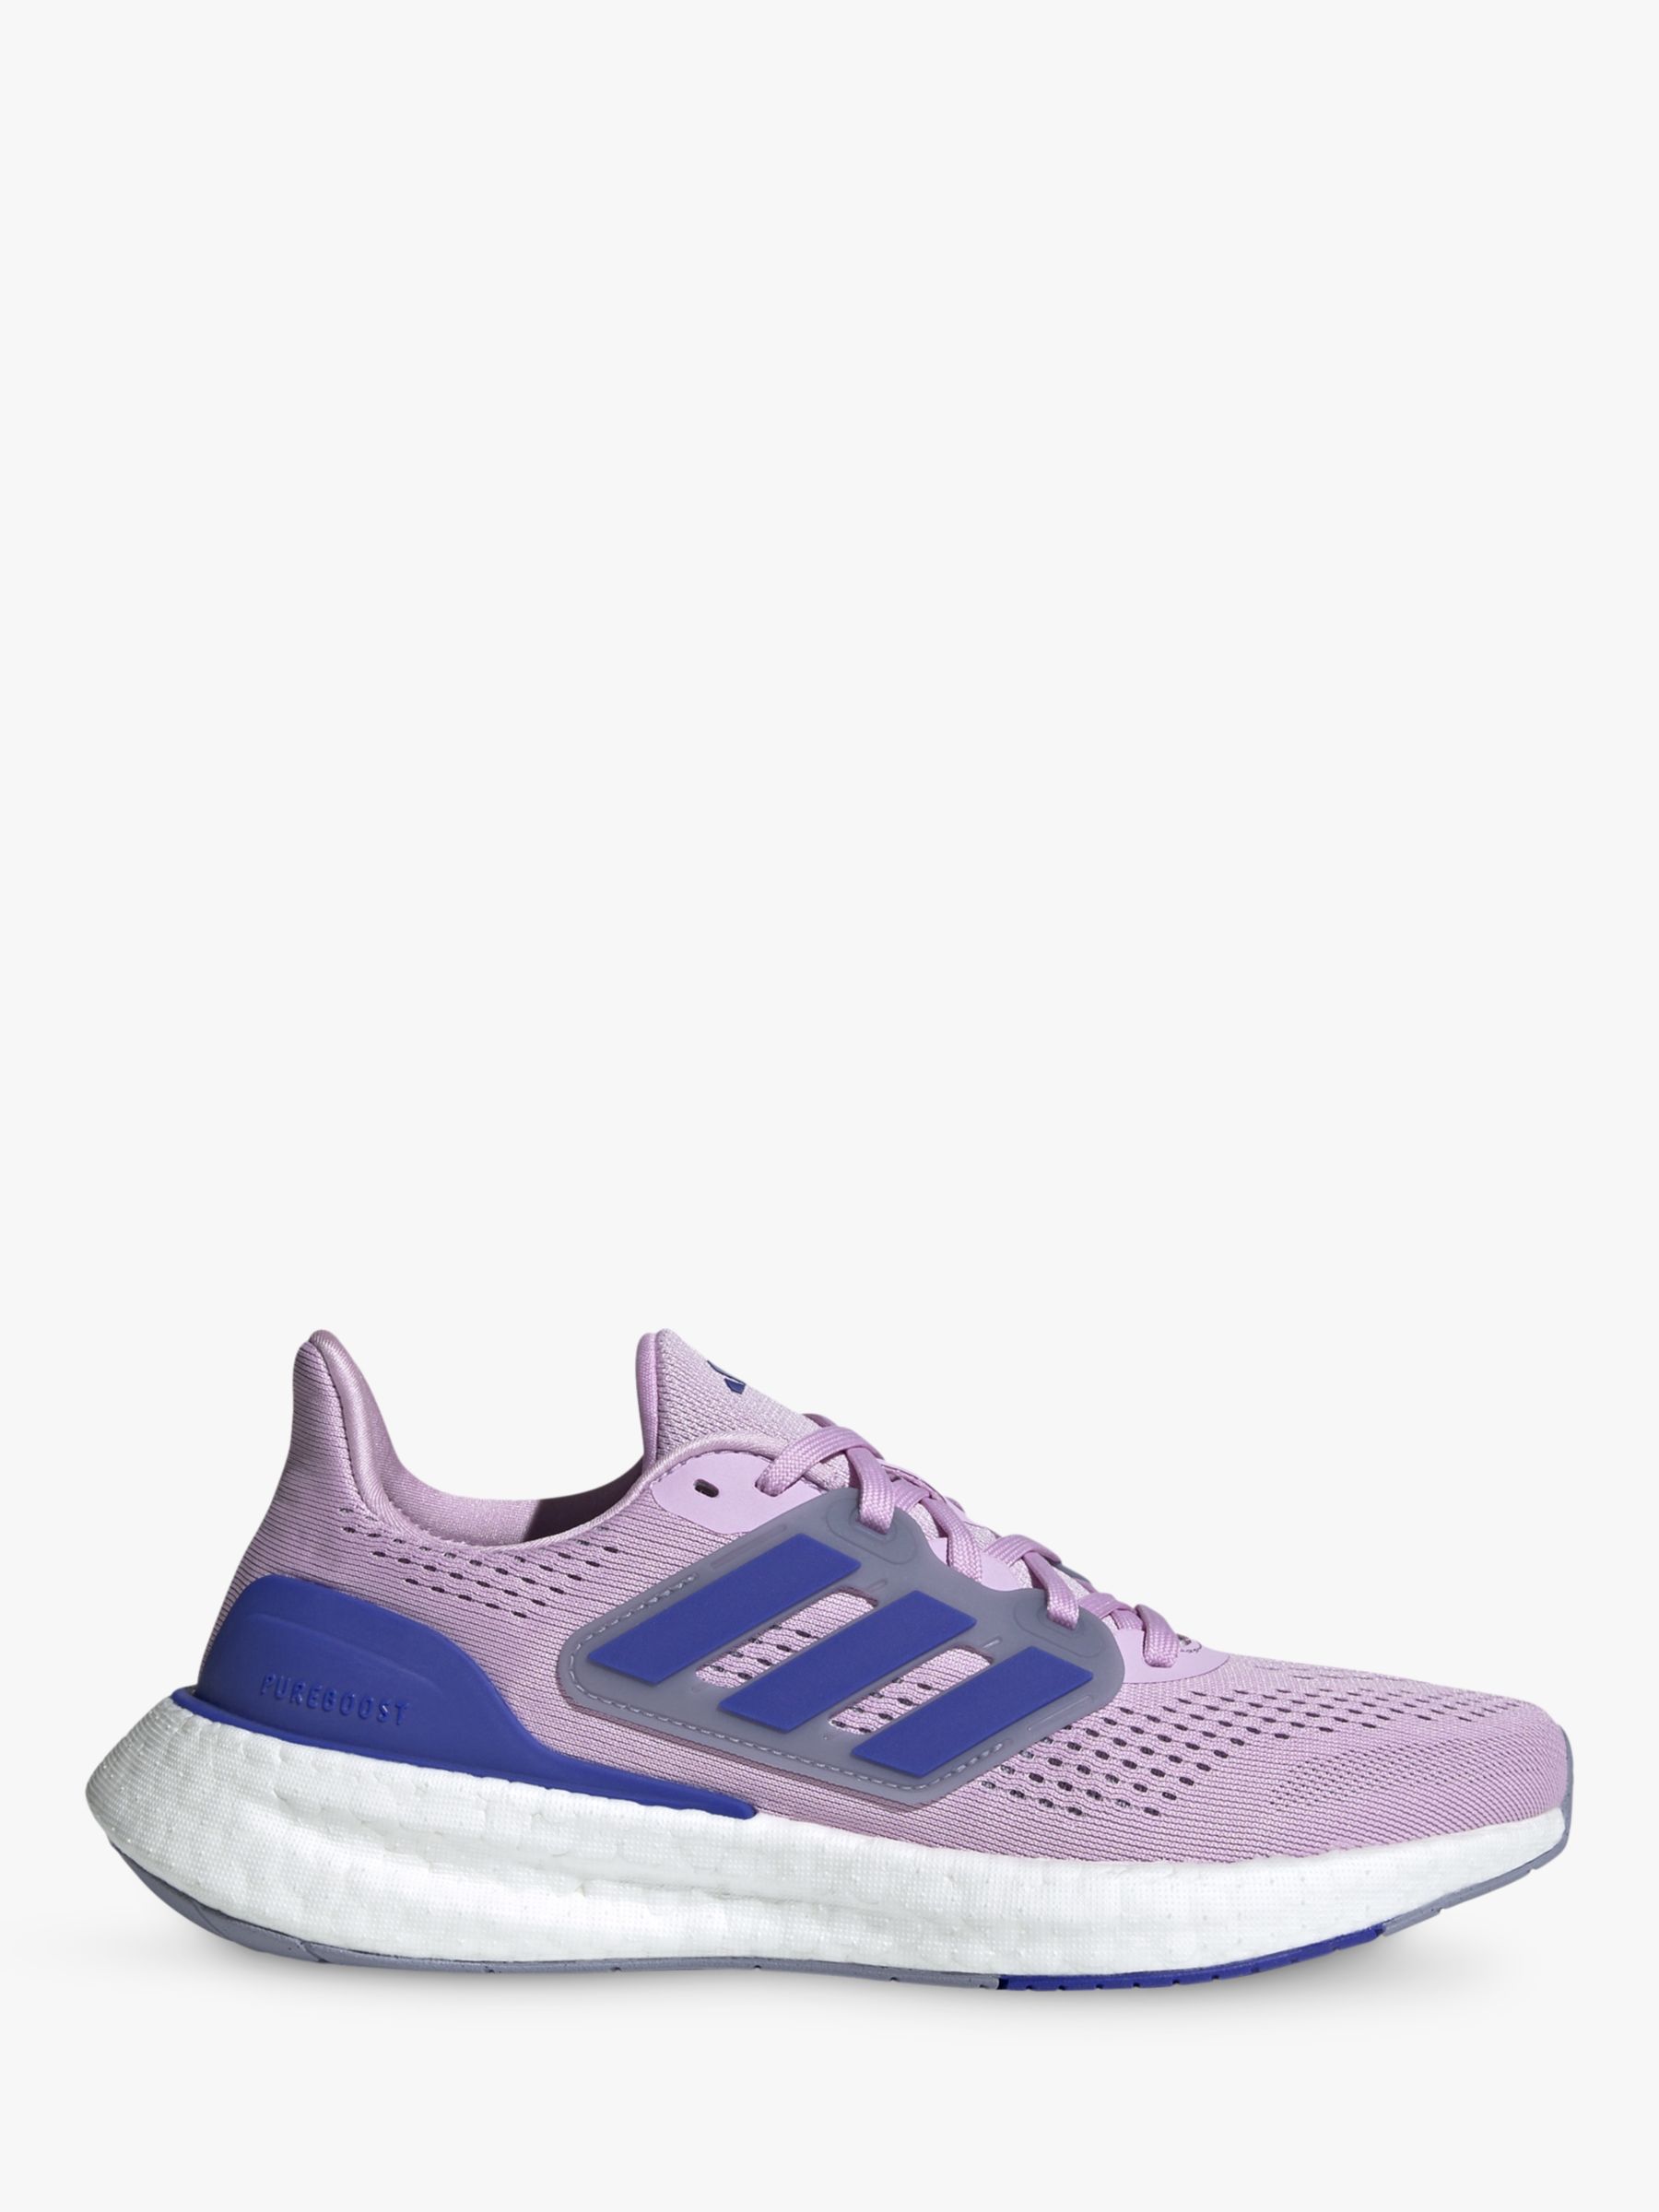 adidas Pureboost 23 Running Shoes, Lilac/Blue/Silver, 4